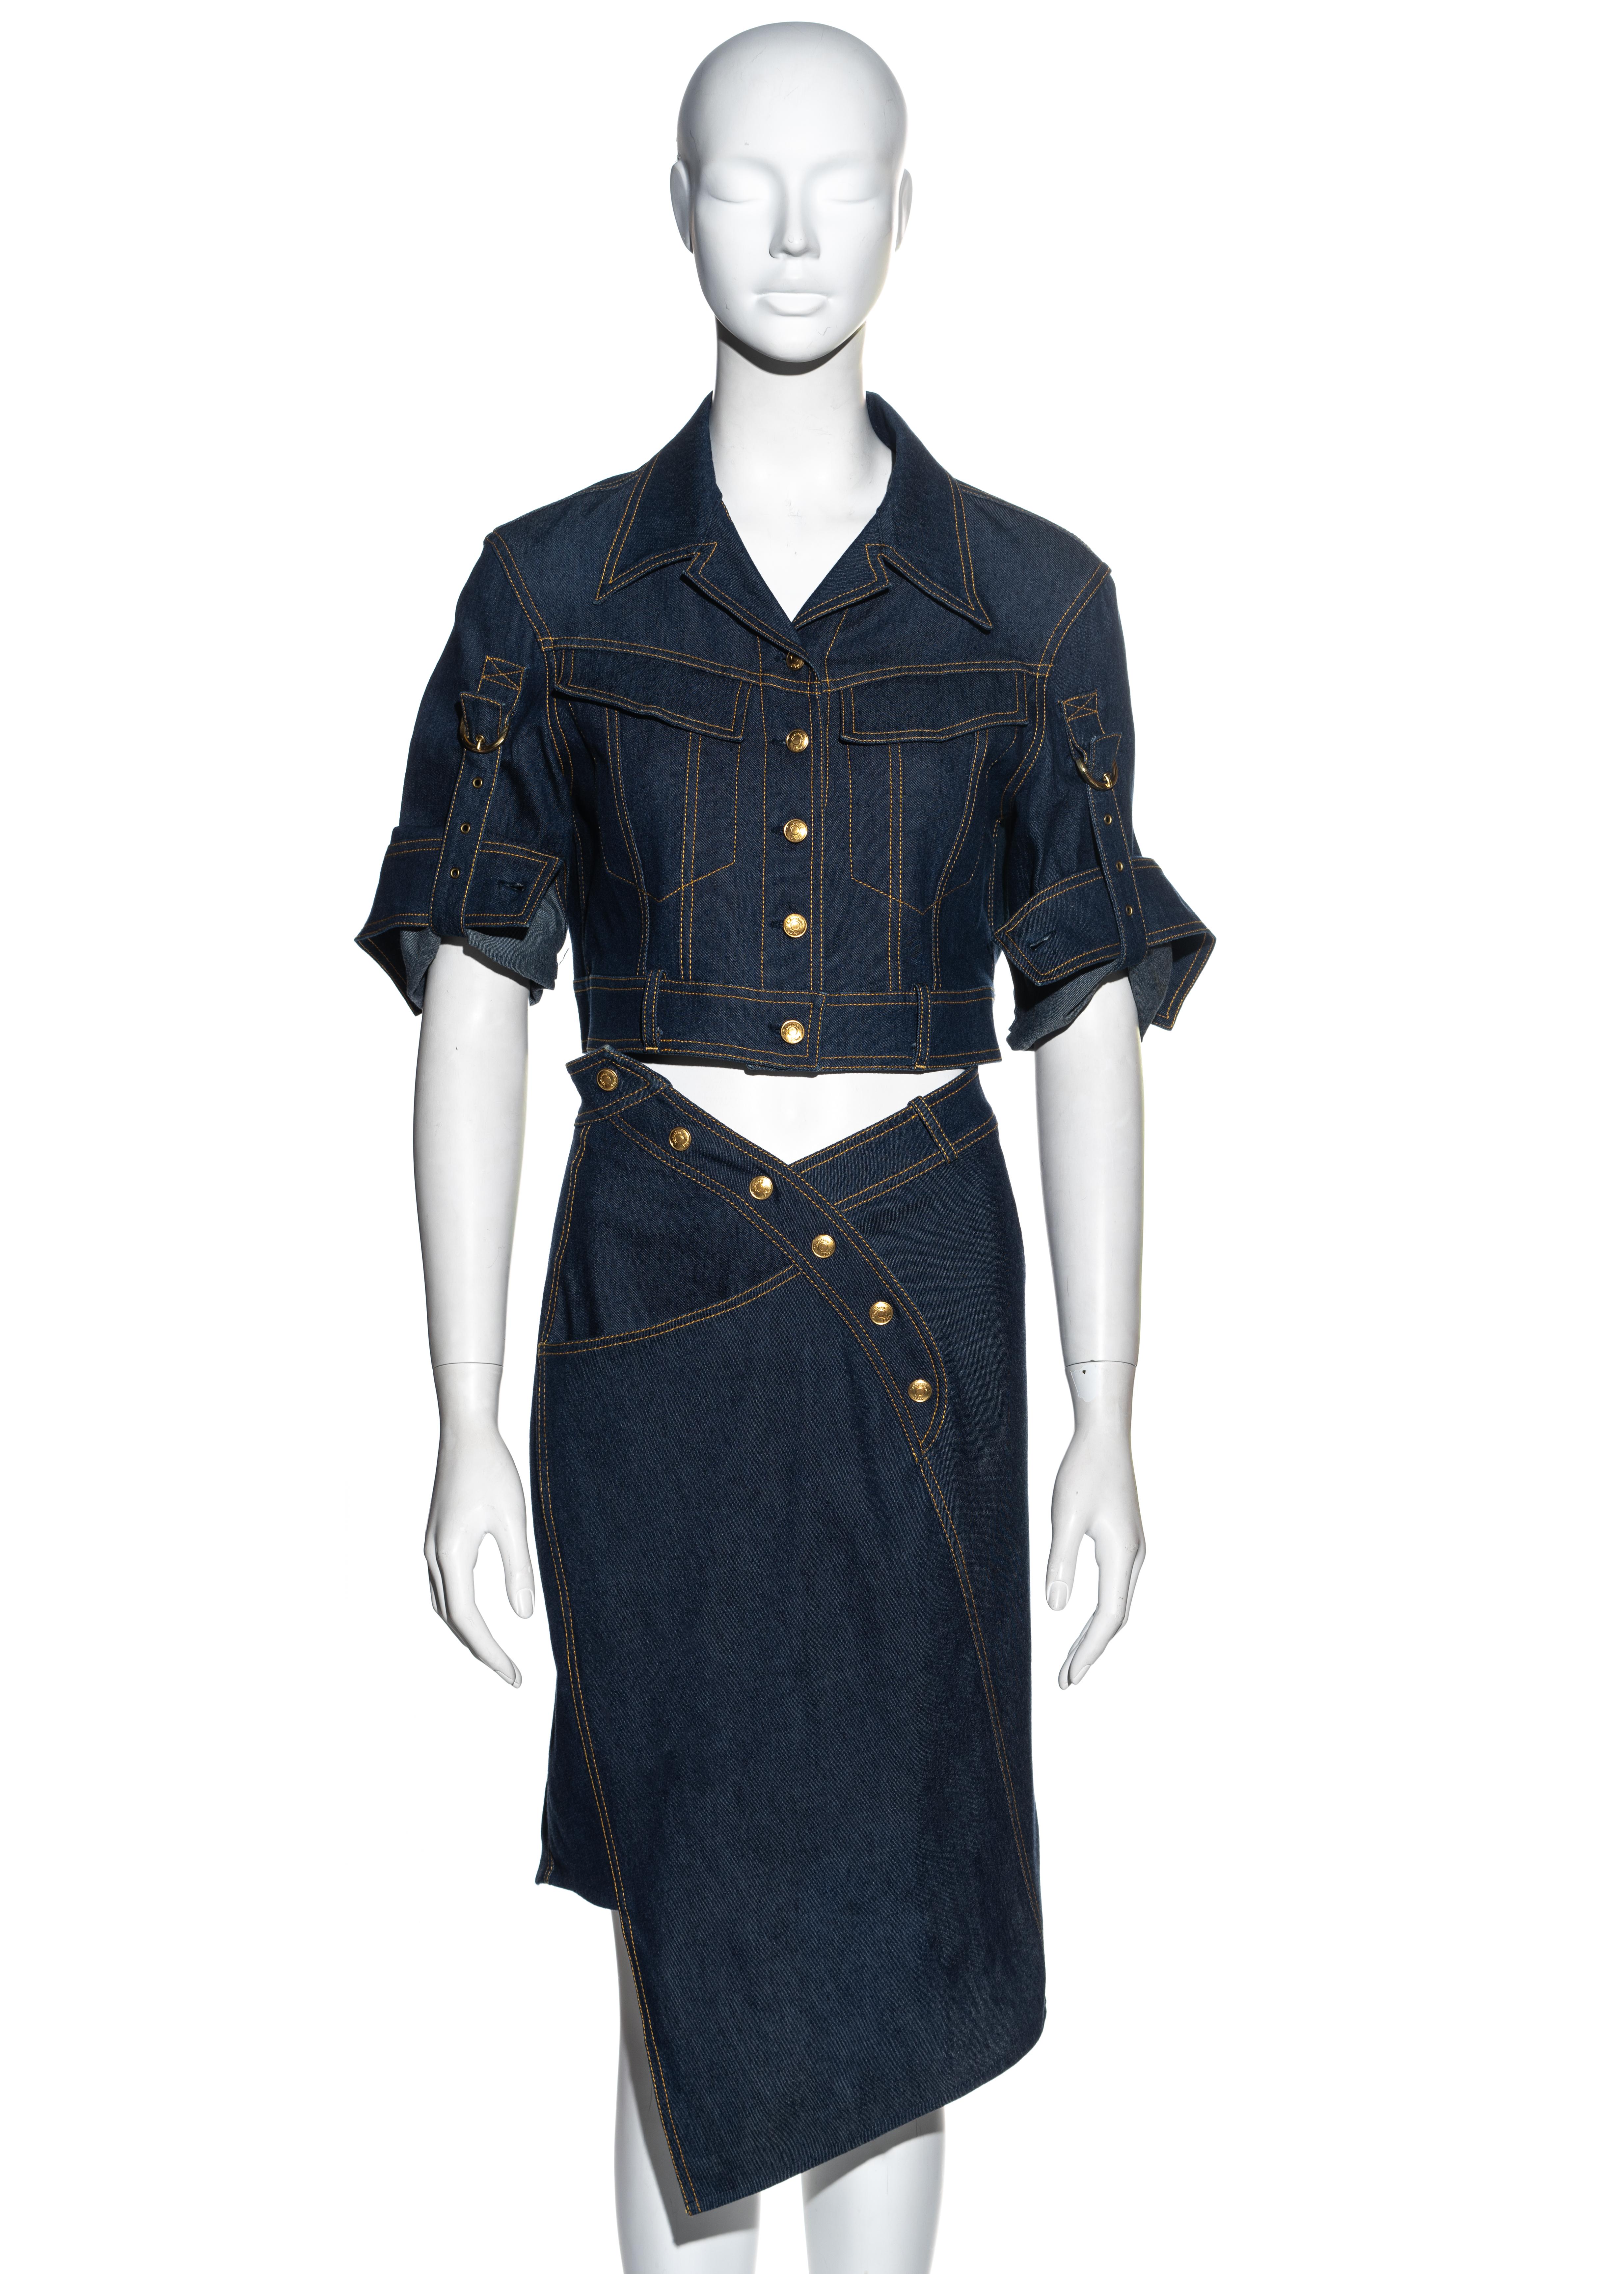 ▪ Christian Dior indigo blue denim jacket and skirt 2 piece set
▪ Designed by John Galliano
▪ Cropped denim jacket 
▪ Bias cut skirt with asymmetric waistline and hemline 
▪ Gold logo signed rivet buttons
▪ Turn-up sleeves with gold buckle